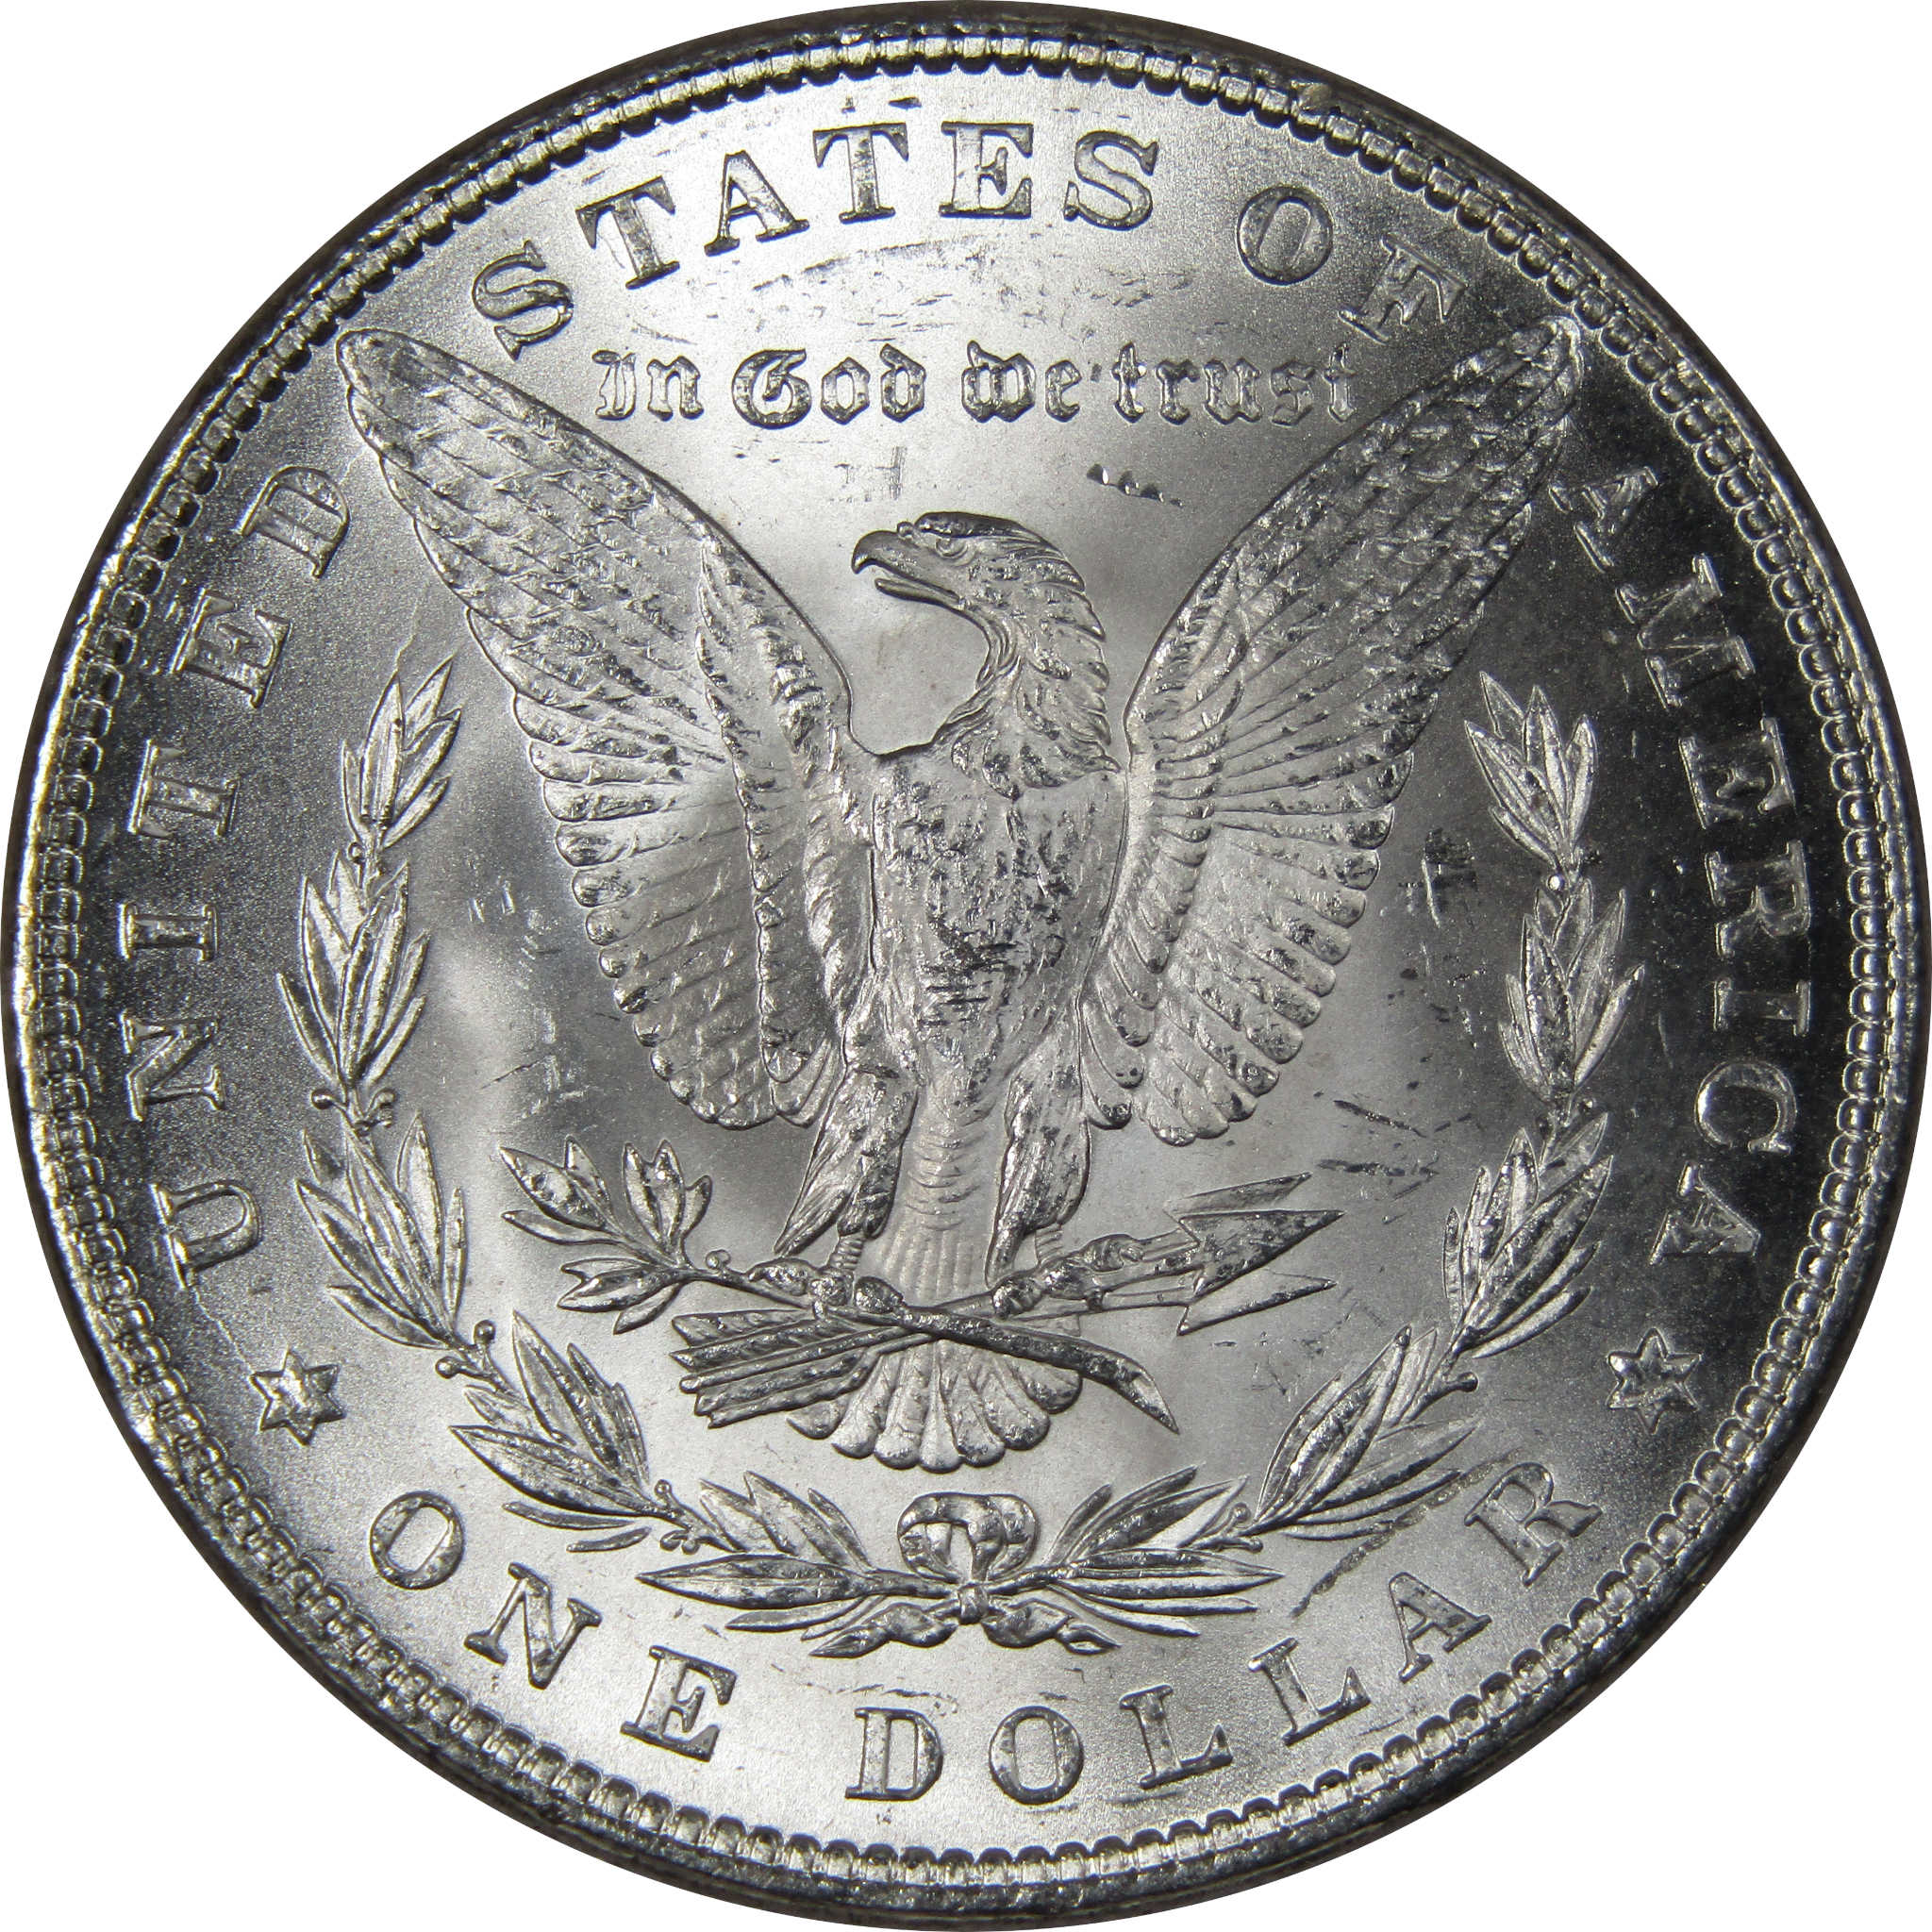 1882 Morgan Dollar BU Uncirculated Mint State 90% Silver SKU:IPC9710 - Morgan coin - Morgan silver dollar - Morgan silver dollar for sale - Profile Coins &amp; Collectibles